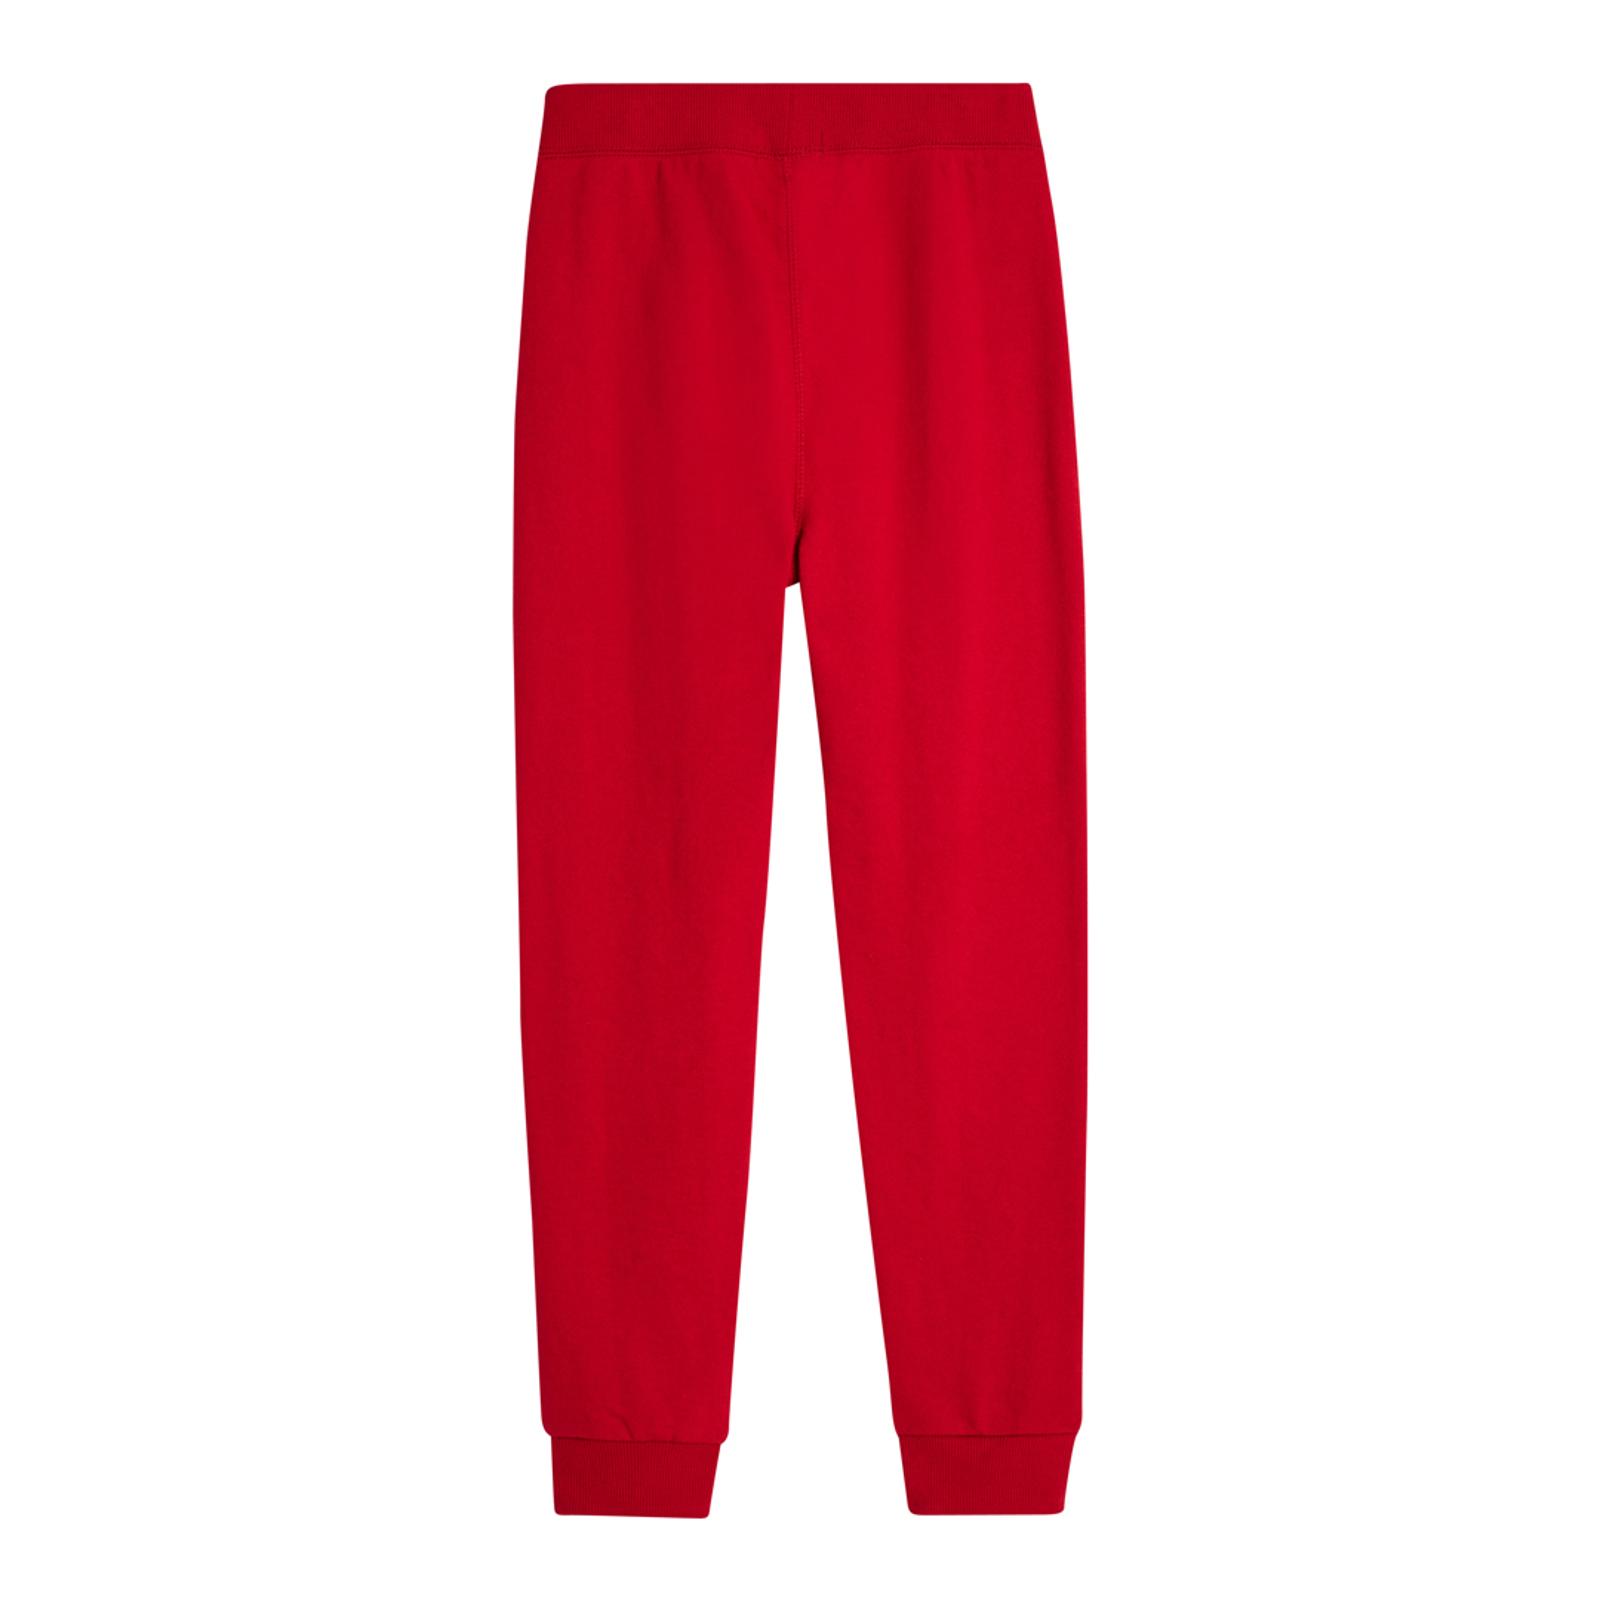 Bright Red Heart Sweatpant Bottoms - BrandAlley